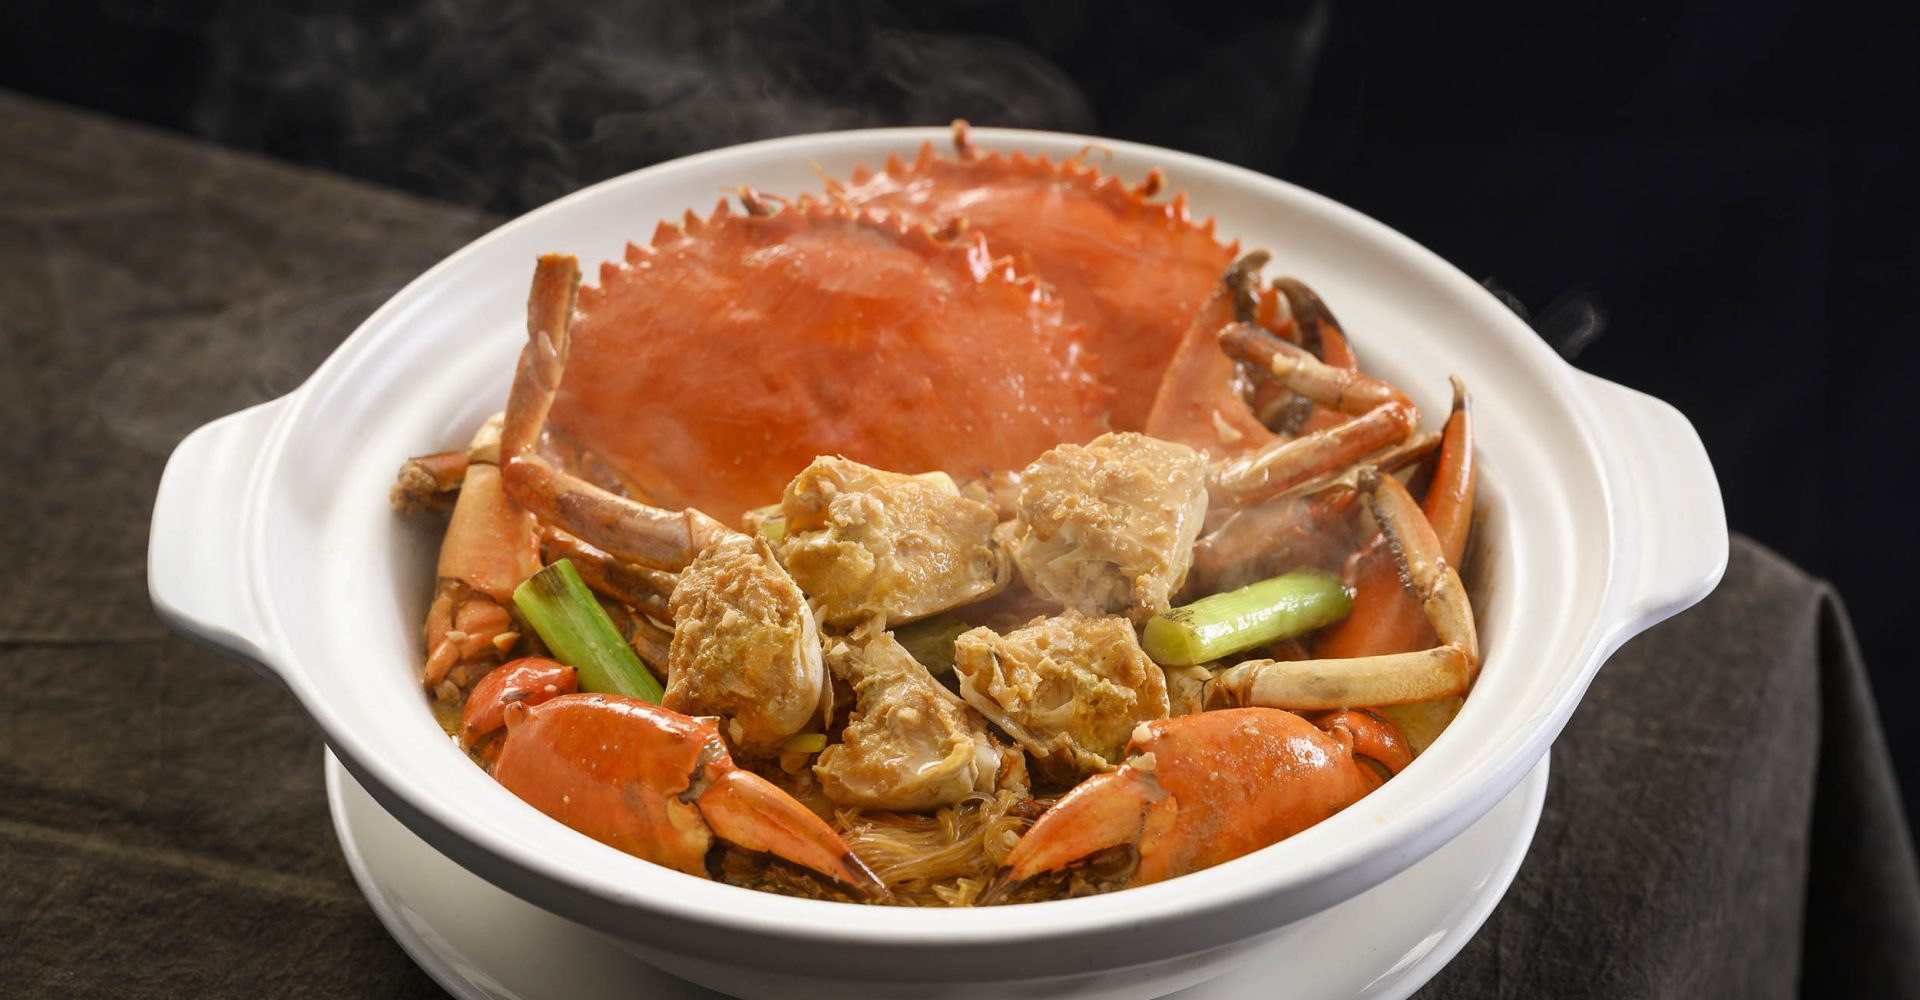 Wok-fried crab with vermicelli in cream sauce